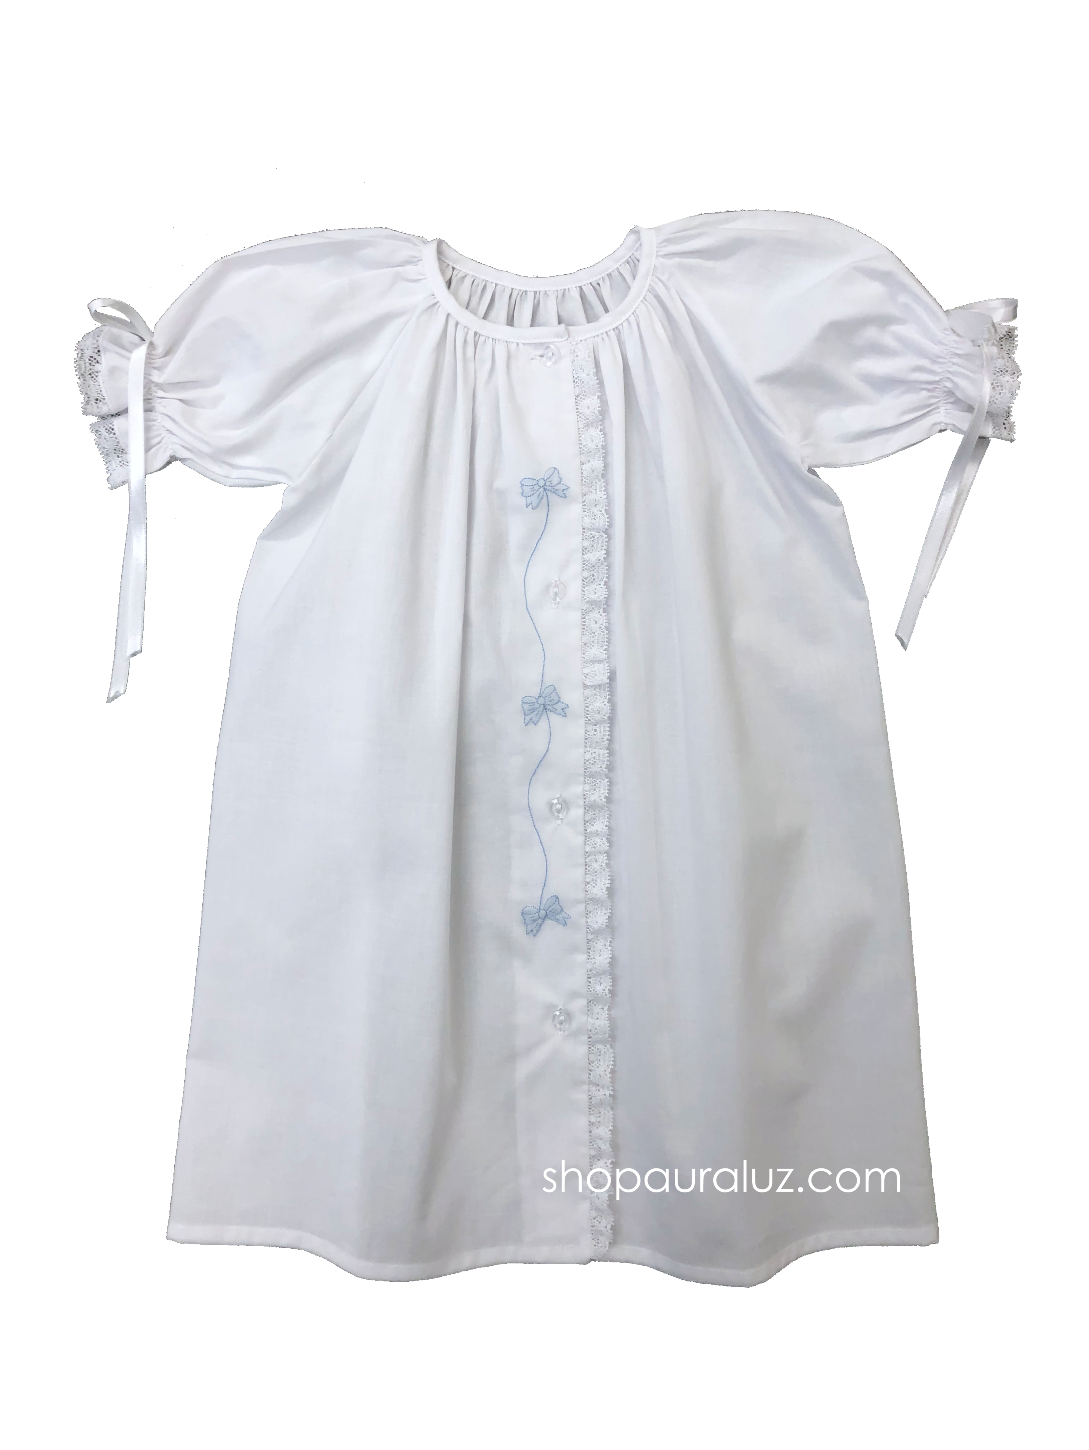 Auraluz Day Gown..White with white lace,ribbons and embroidered blue bows